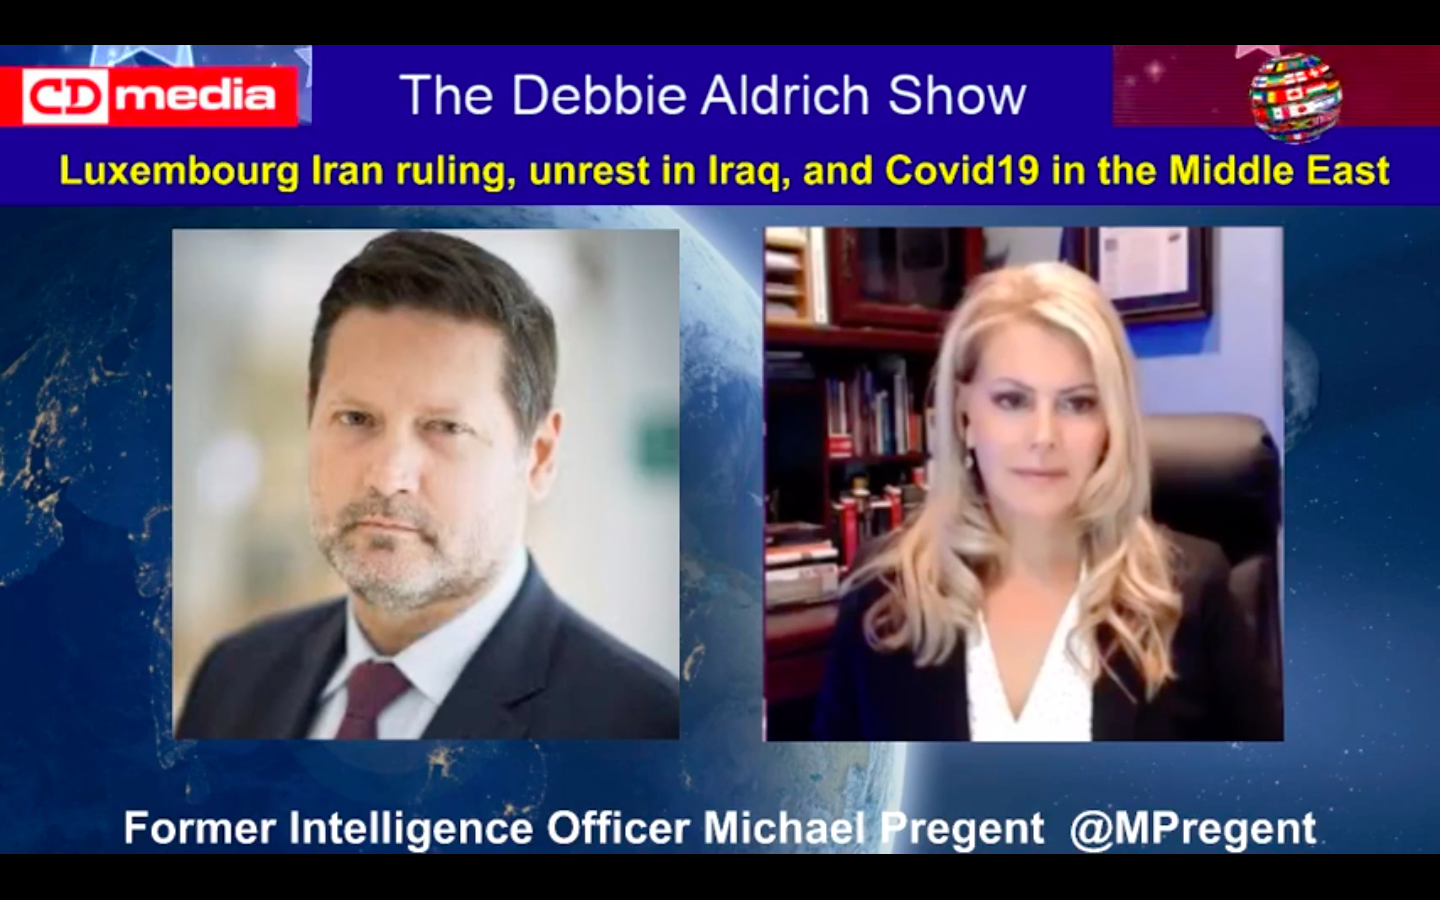 Michael Pregent Dishes With Debbie Aldrich On COVID-19 In Middle East, Iran, And Iraq